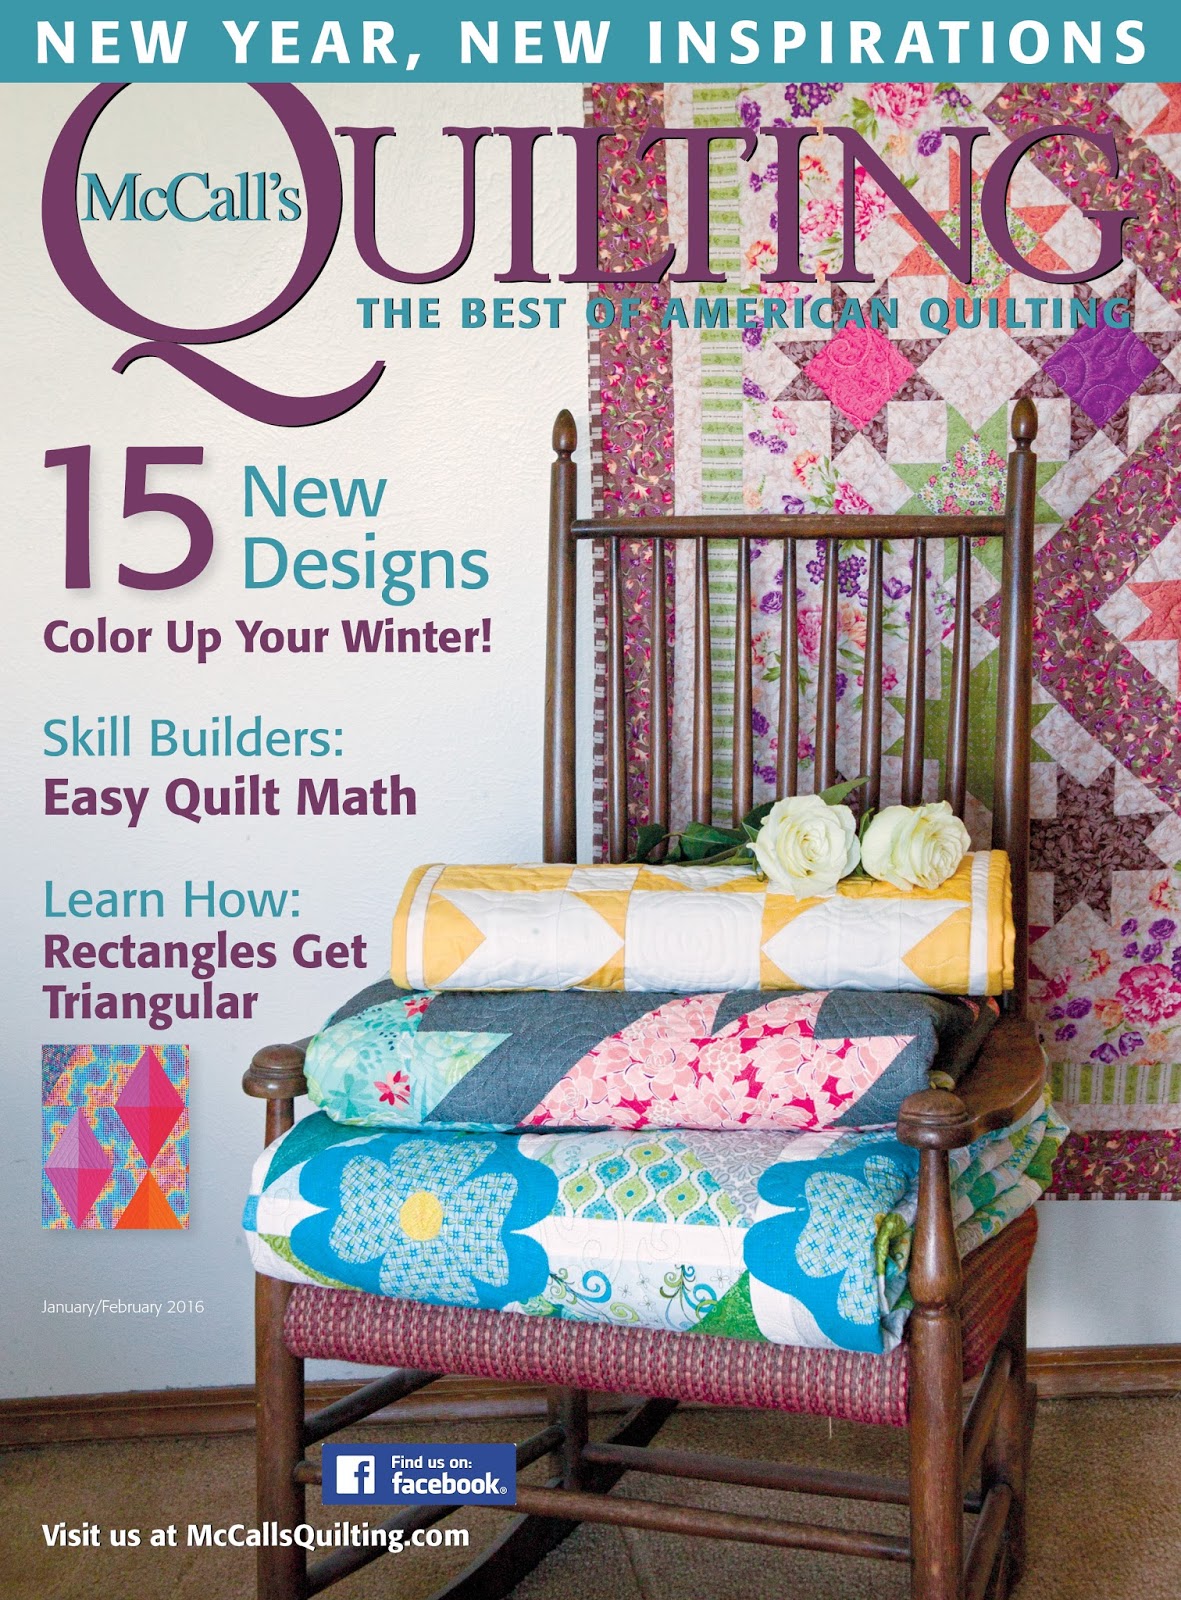 Guest Blogging for McCall's Quilting.